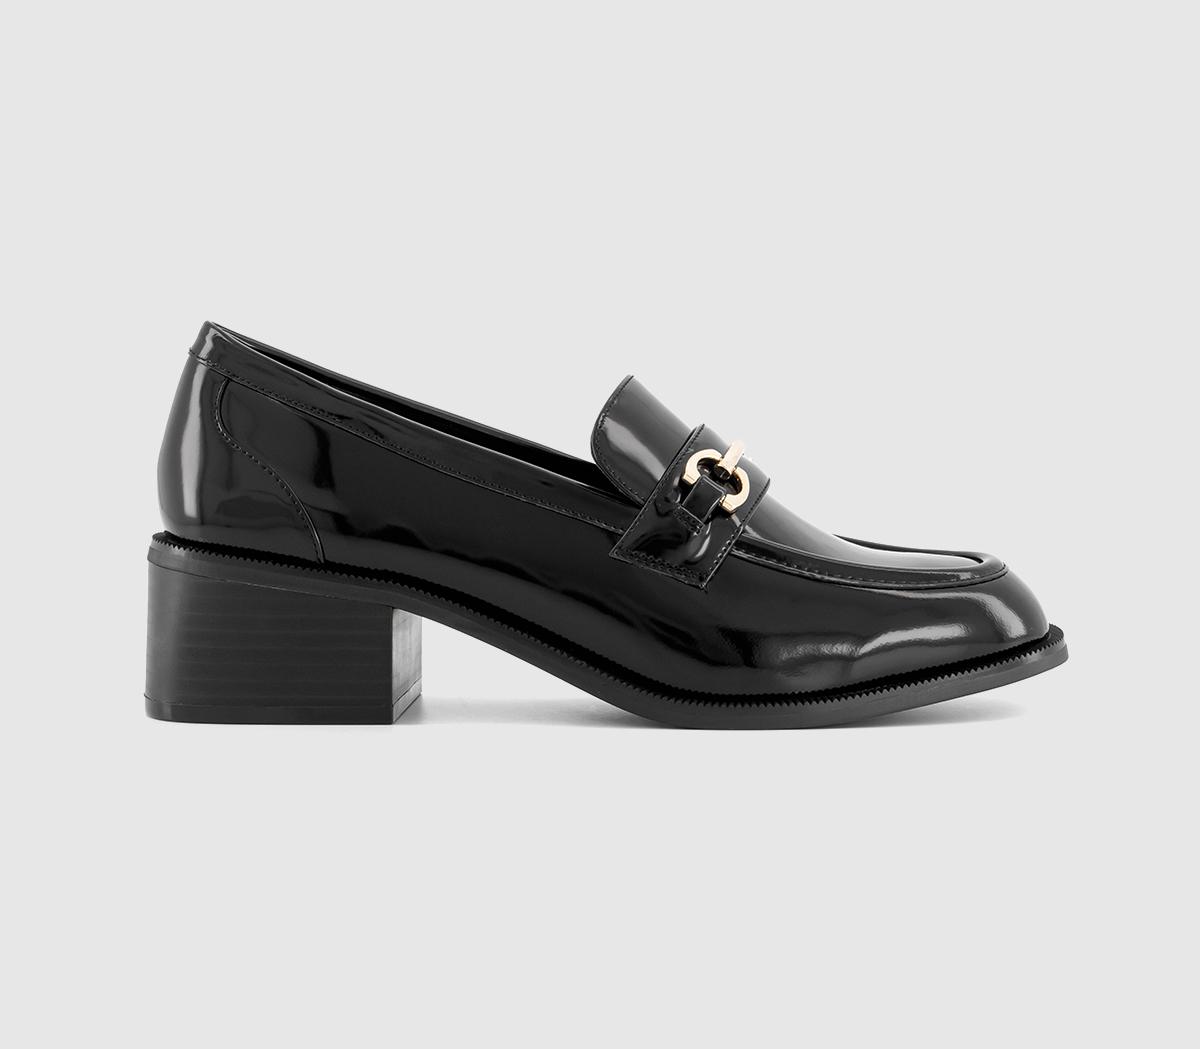 OFFICEMackenzie Snaffle Detail Heeled LoafersBlack Leather